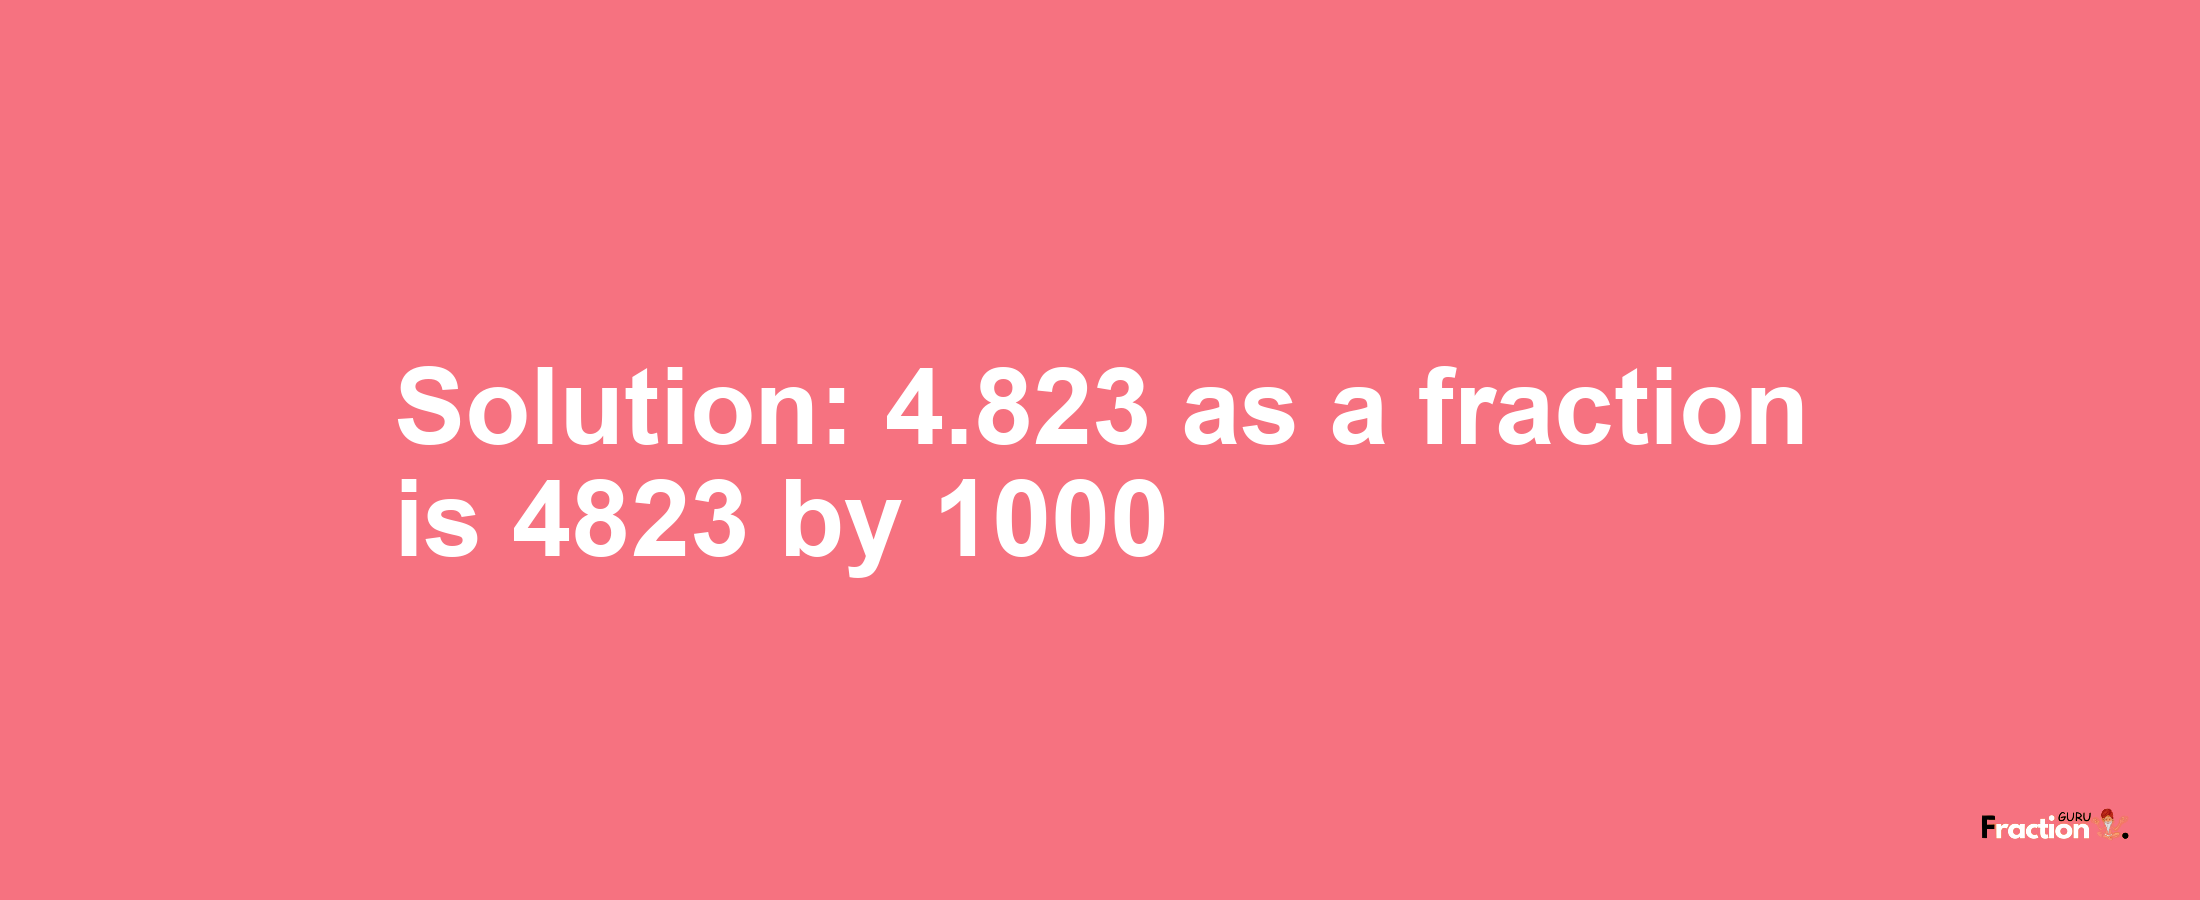 Solution:4.823 as a fraction is 4823/1000